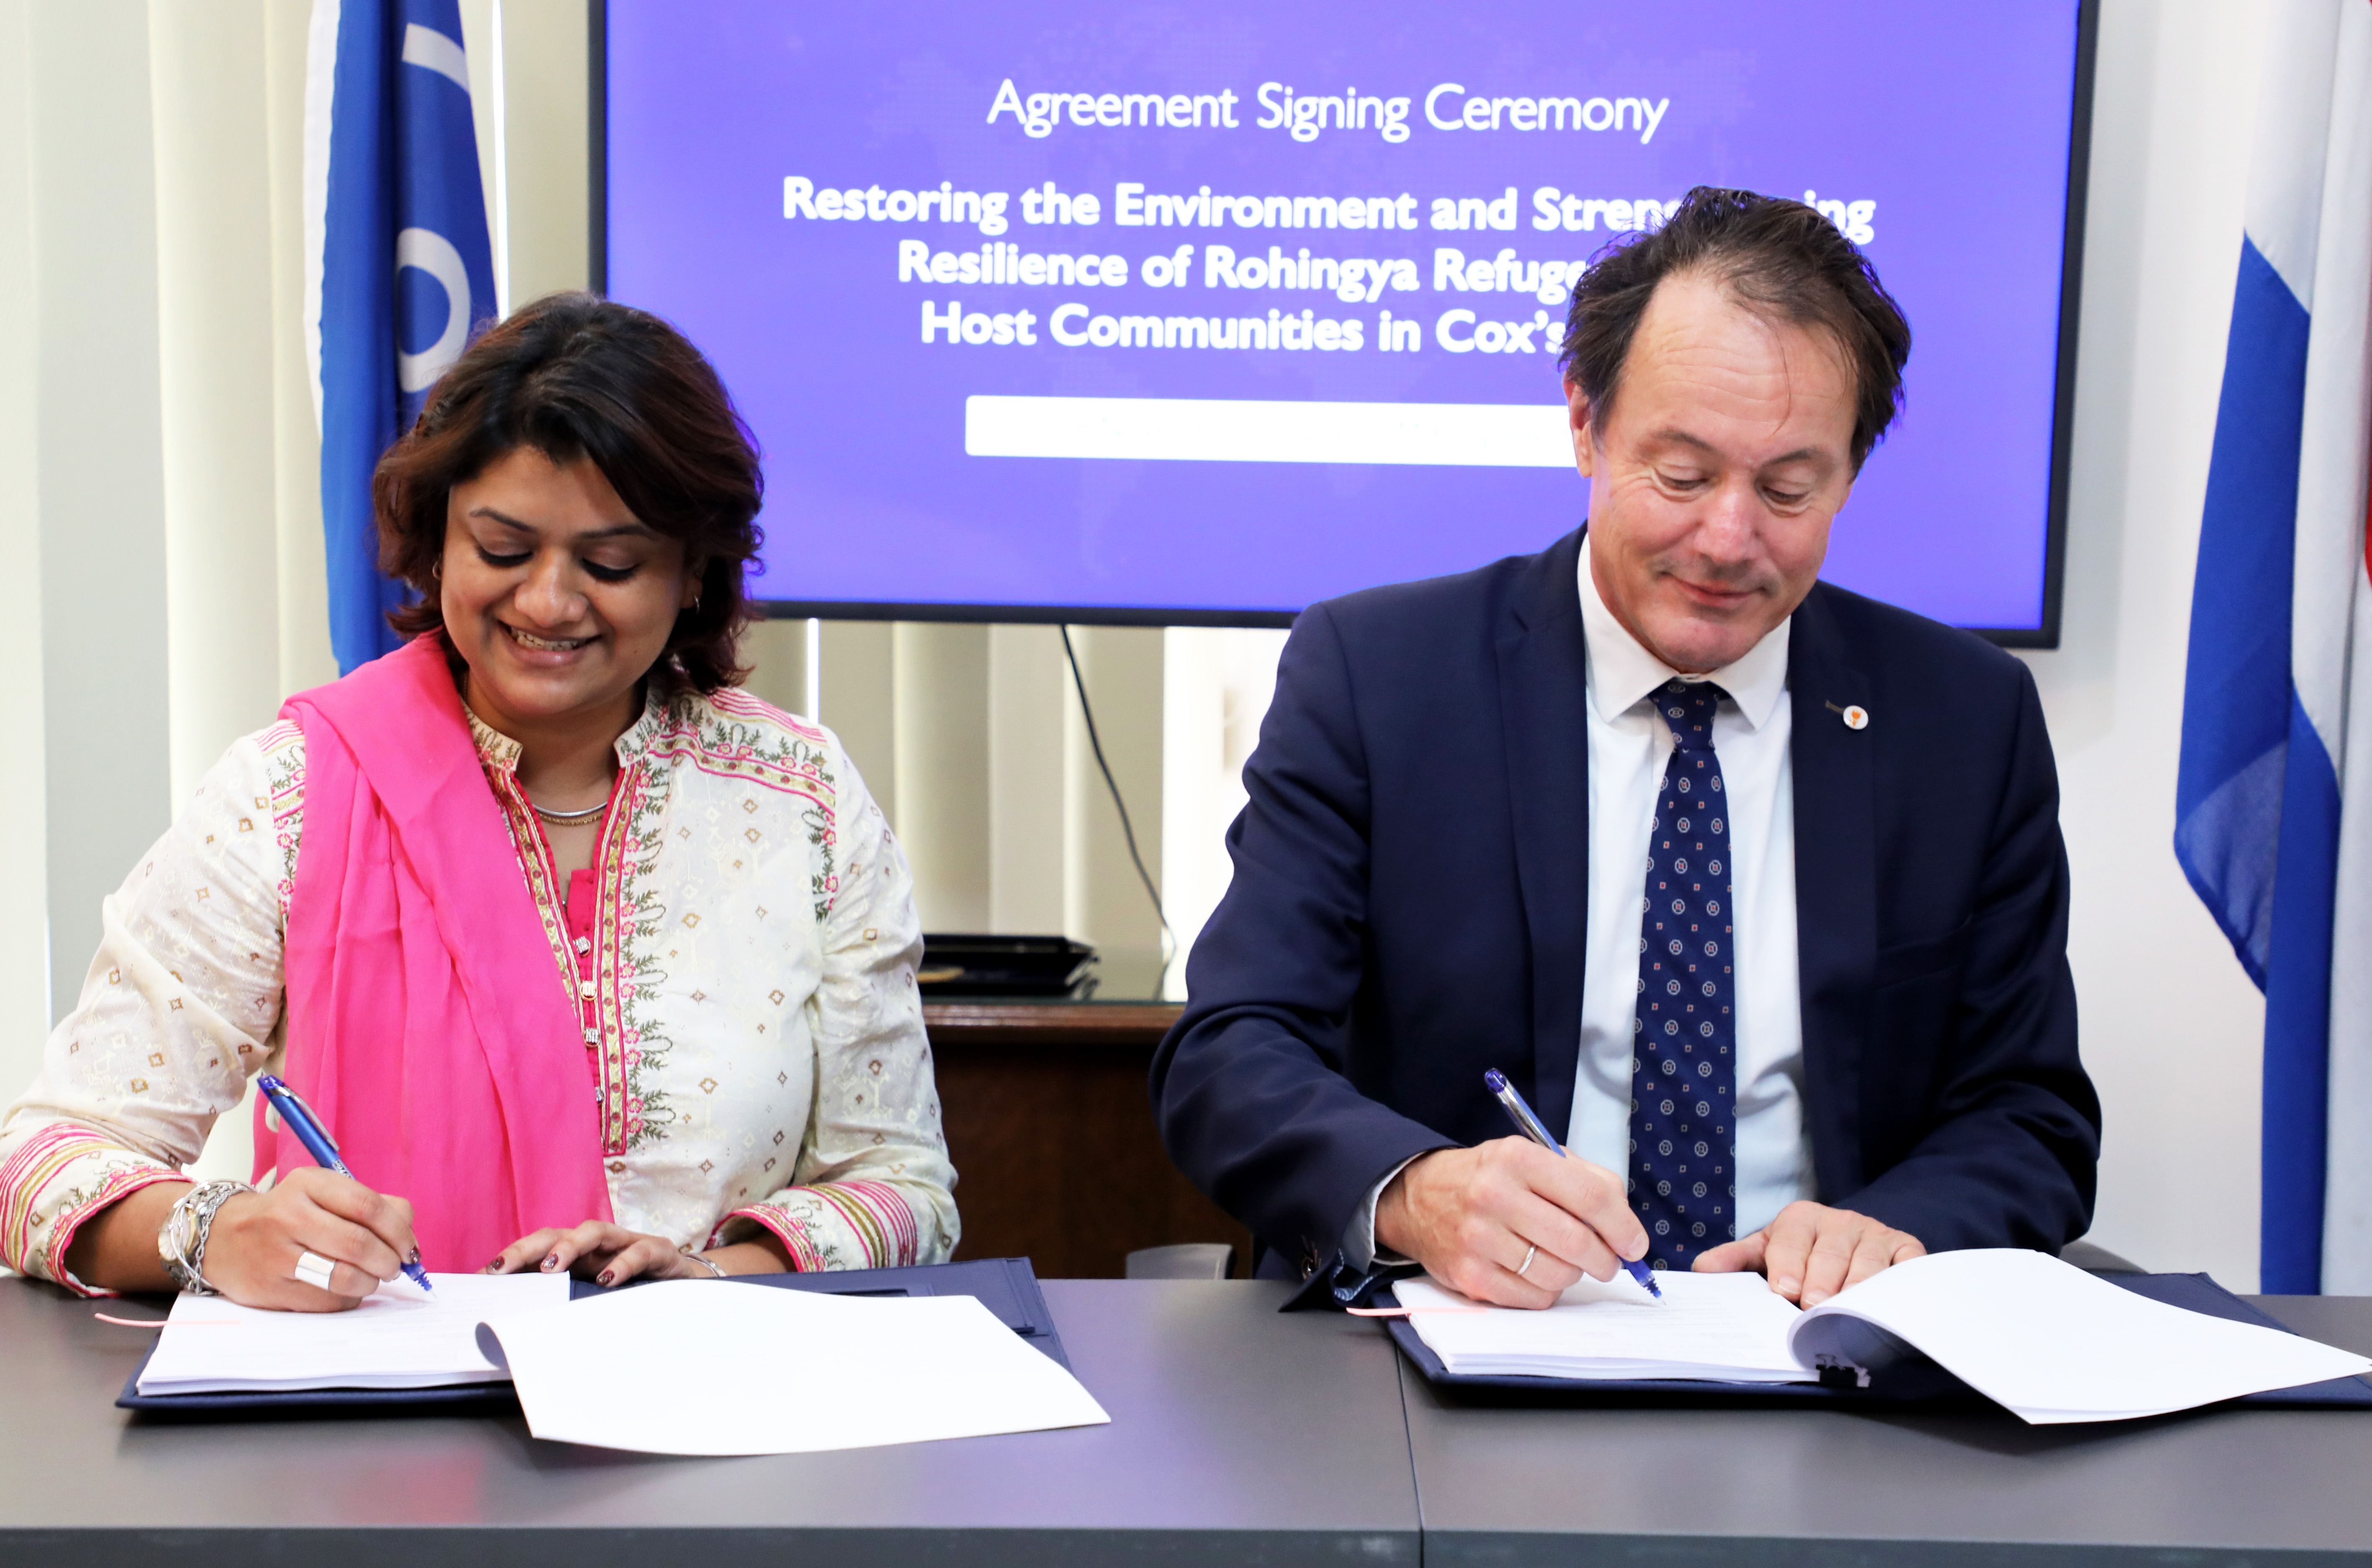 The Netherlands and IOM Join Hands to Restore the Environment and Strengthen Resilience of Rohingya Refugees and Host Communities in Cox’s Bazar